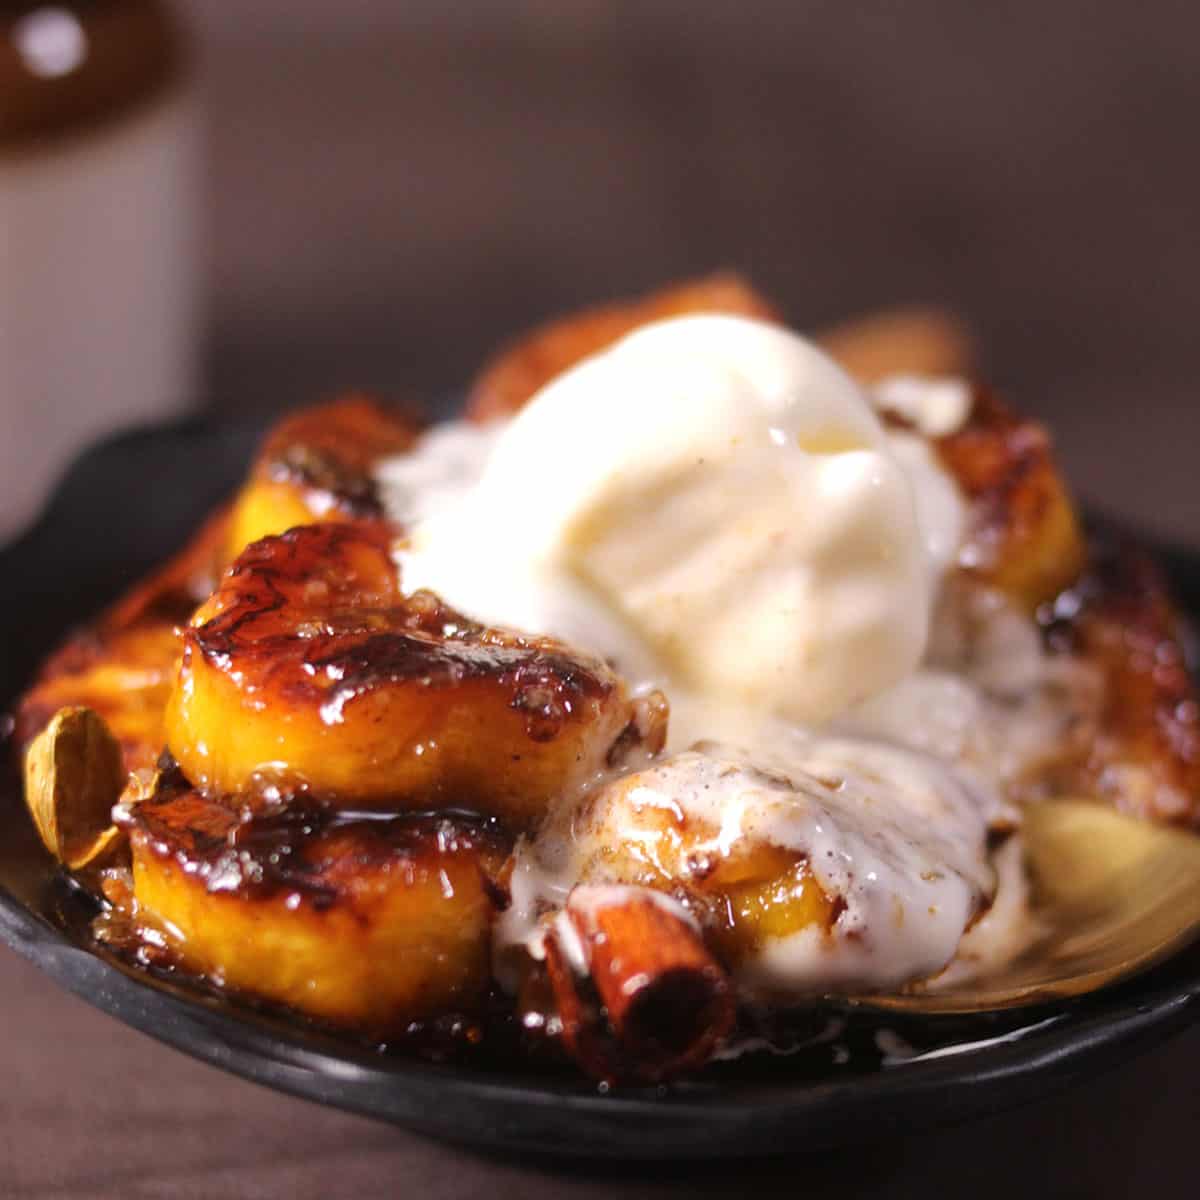 Serve caramelized plantains or bananas with vanilla ice cream or whipped cream. 